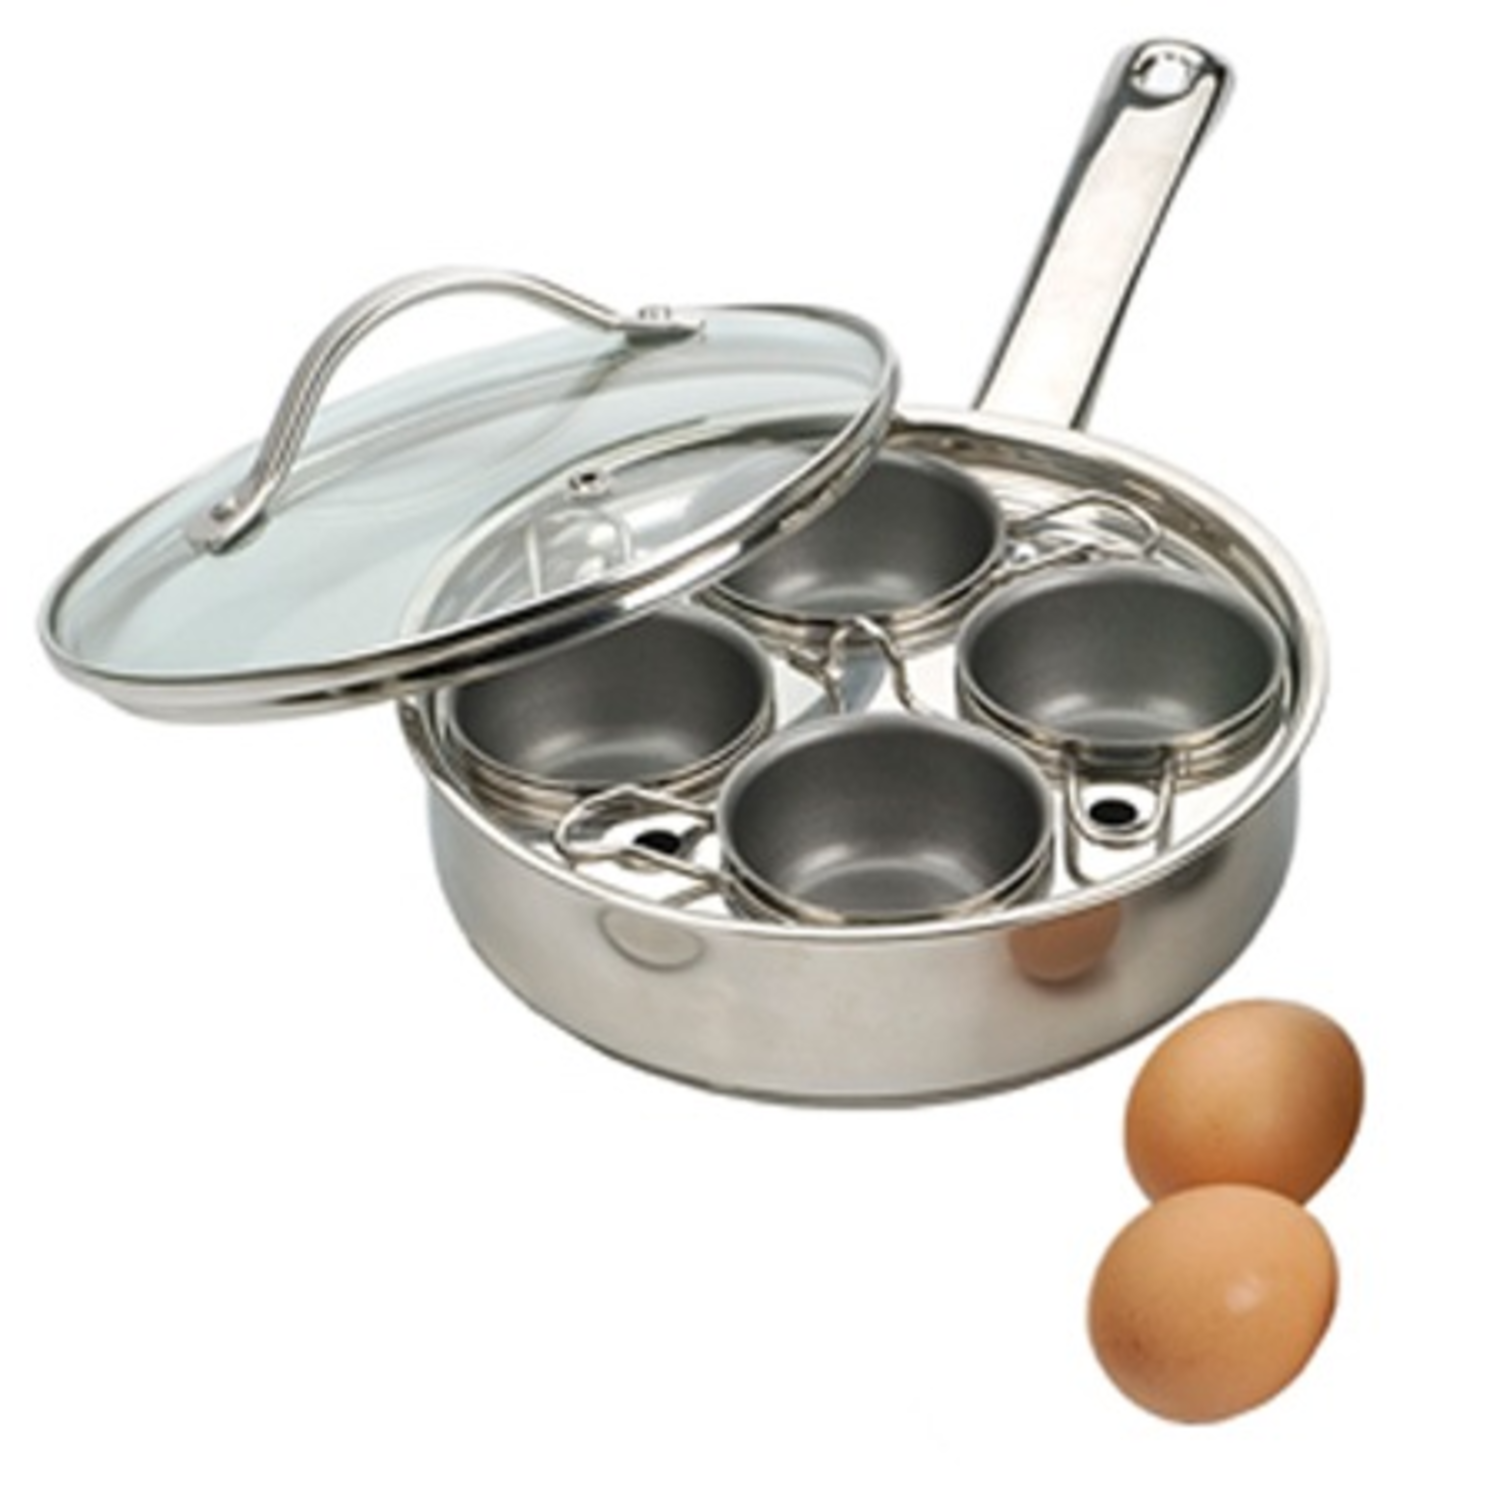 Cooks Standard 4 Cup Nonstick Hard Anodized Egg Poacher Pan with Lid